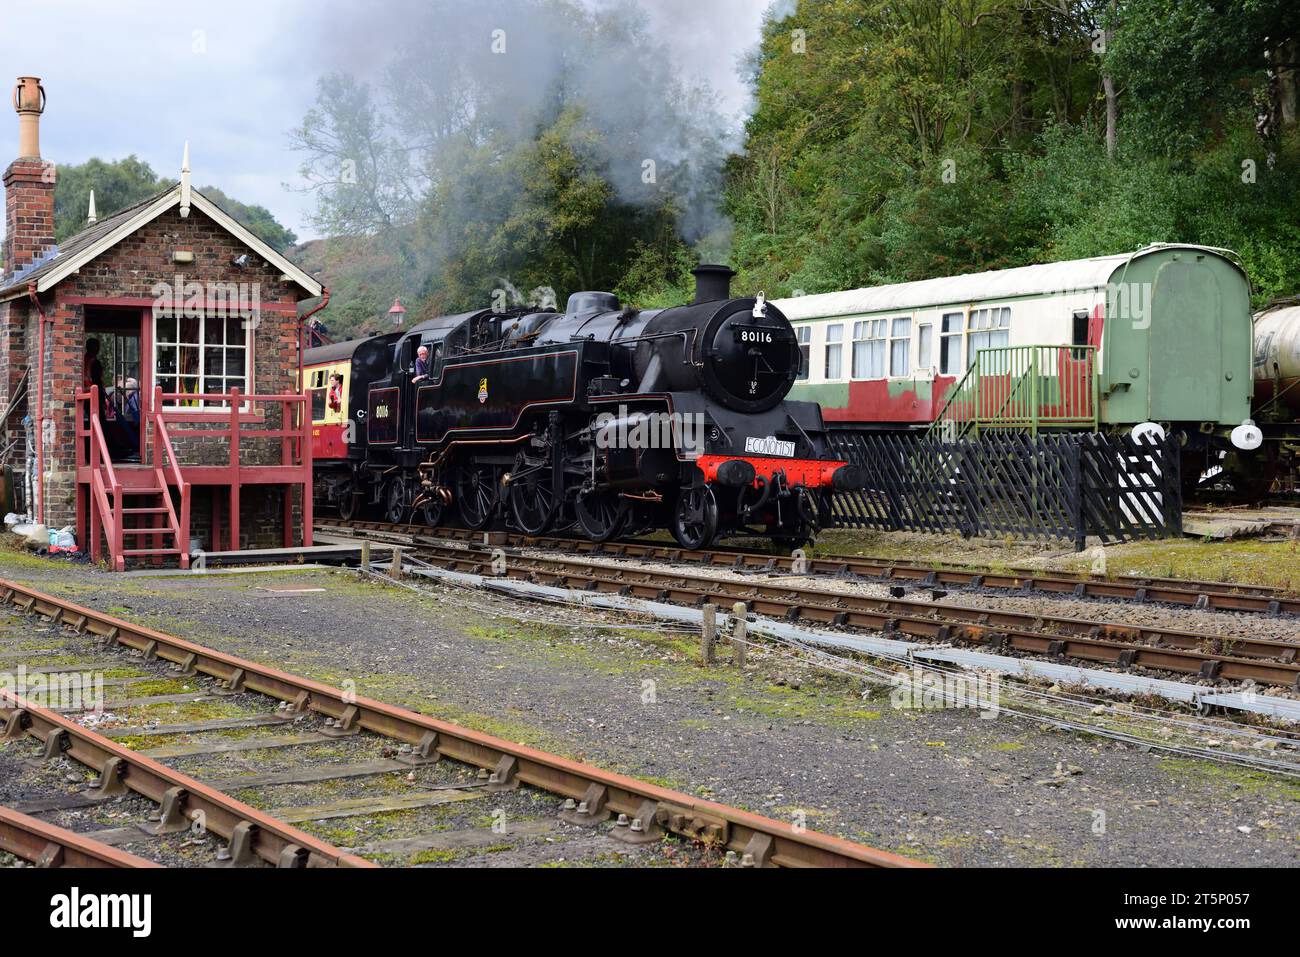 BR Standard Class 4 tank No 80136 (running as 80116) arrives at Goathland station during the North Yorkshire Moors Railway 50th Anniversary gala. Stock Photo